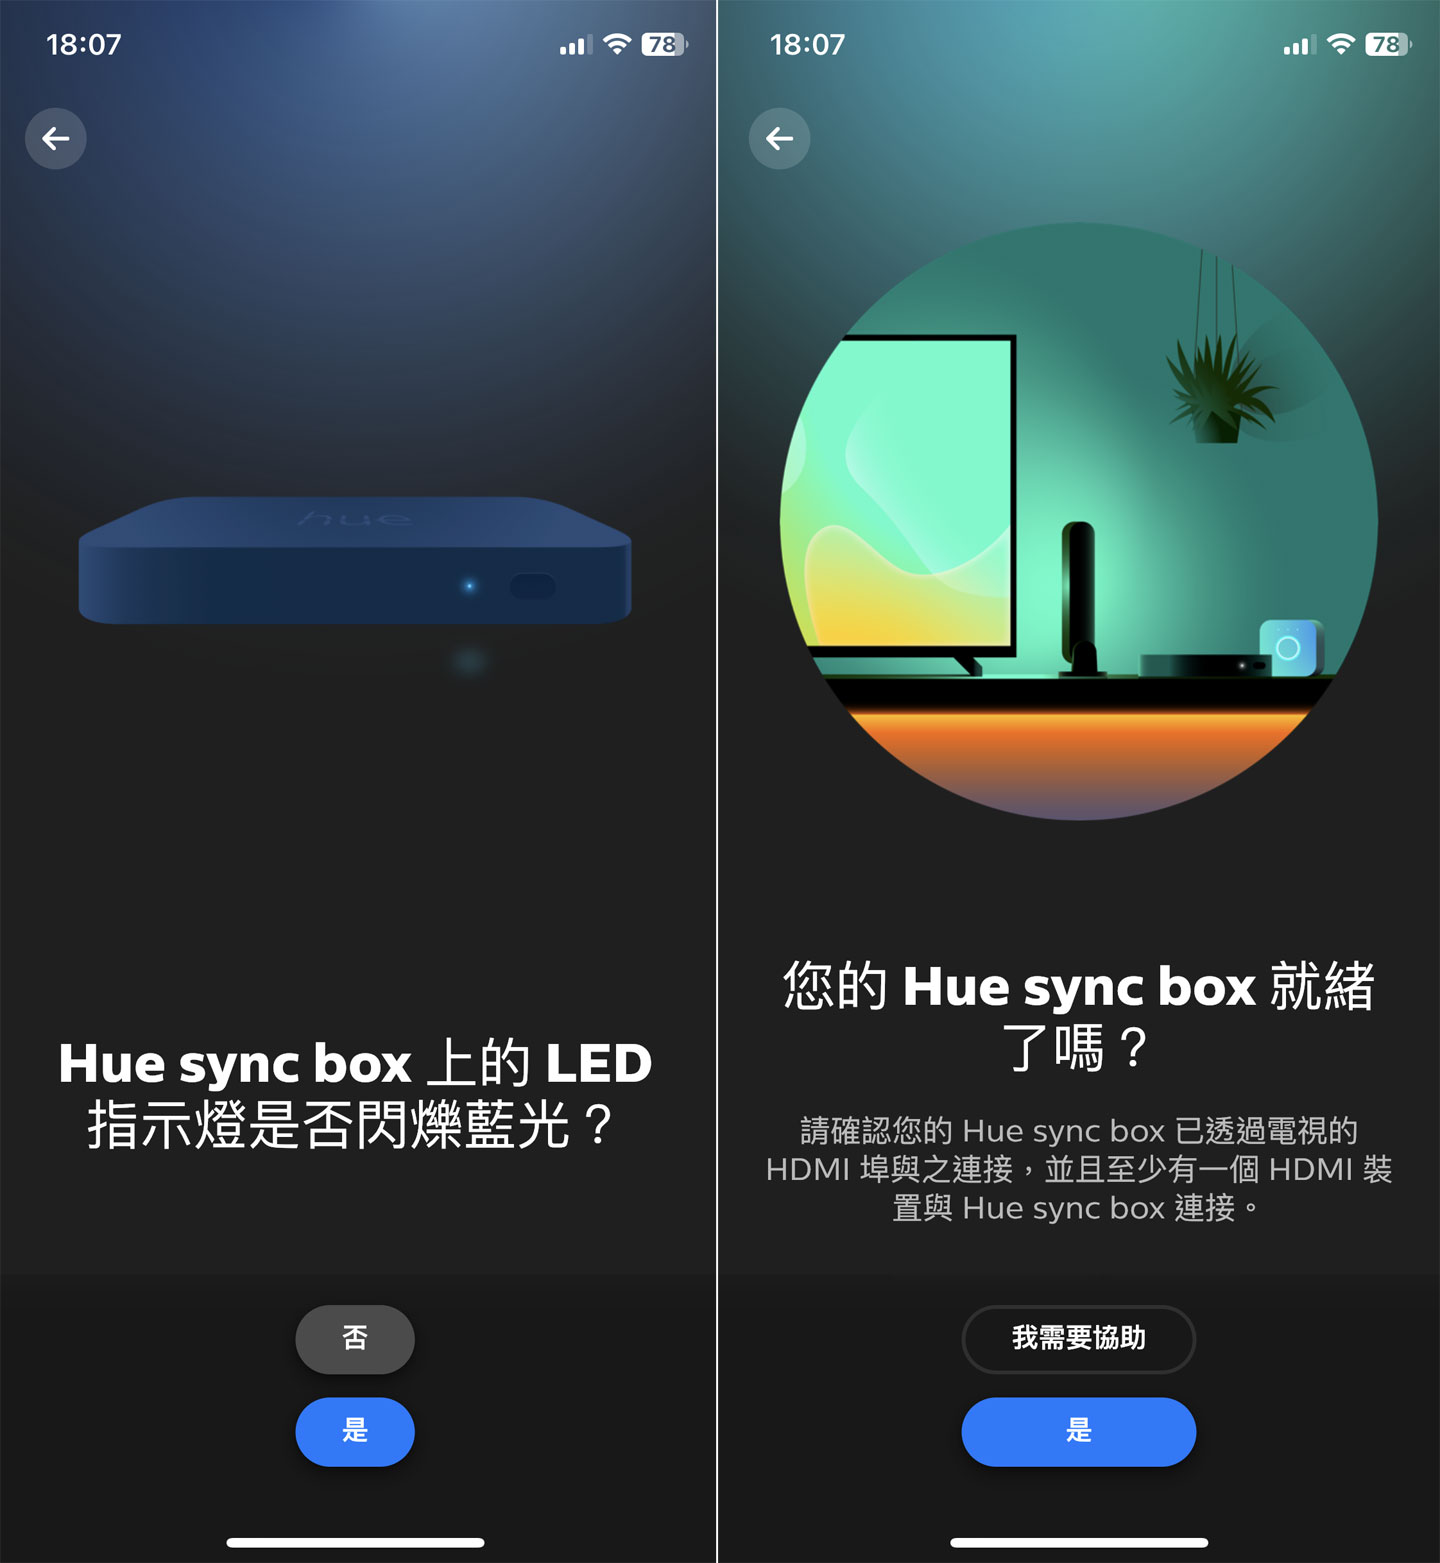 The Hue Play video and light synchronizer can also be installed according to the instructions of the Hue app.